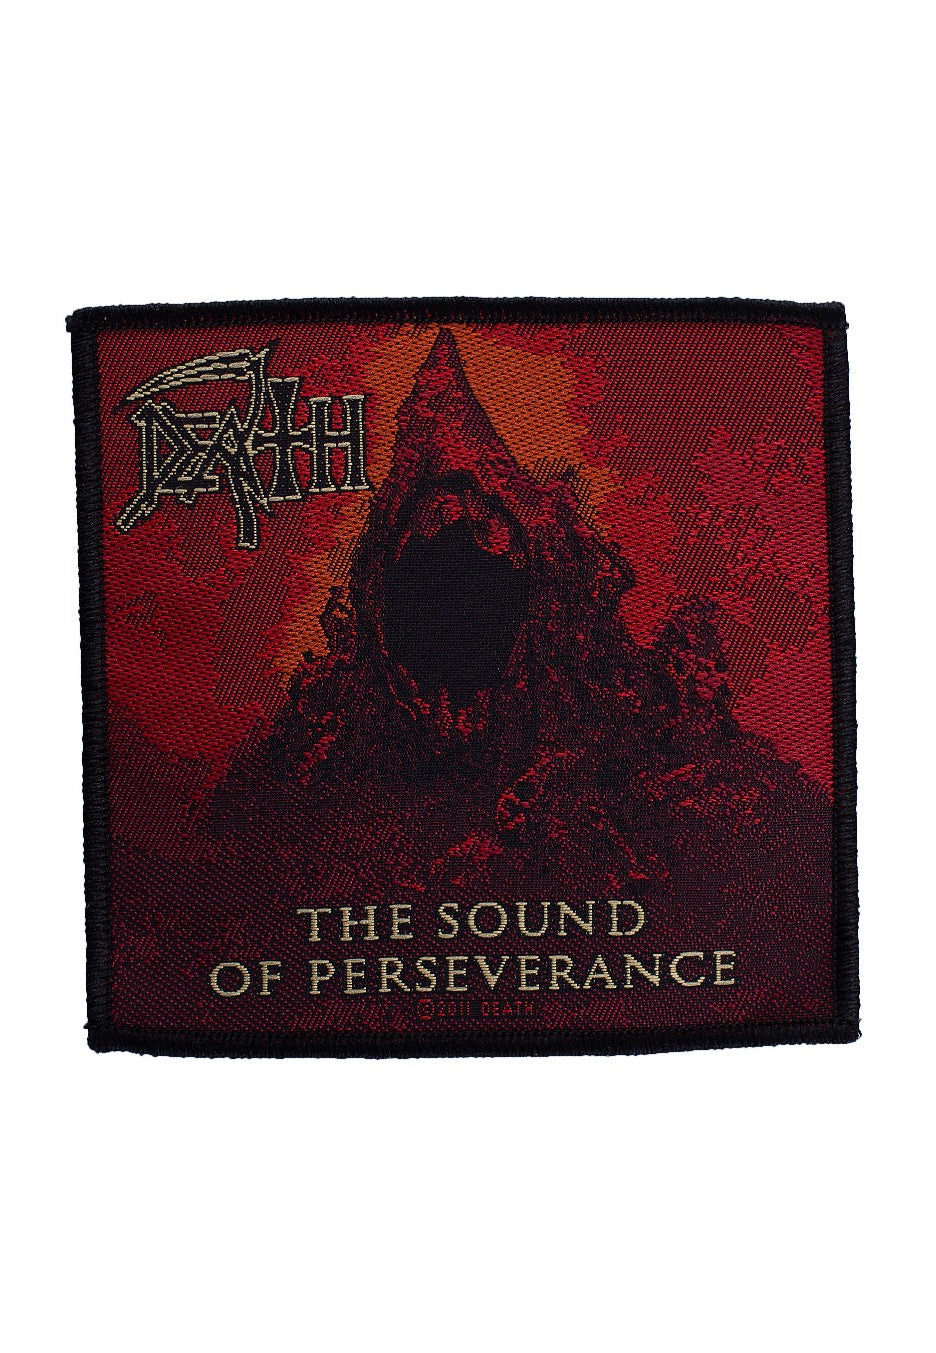 Death - The Sound Of Perseverance - Patch